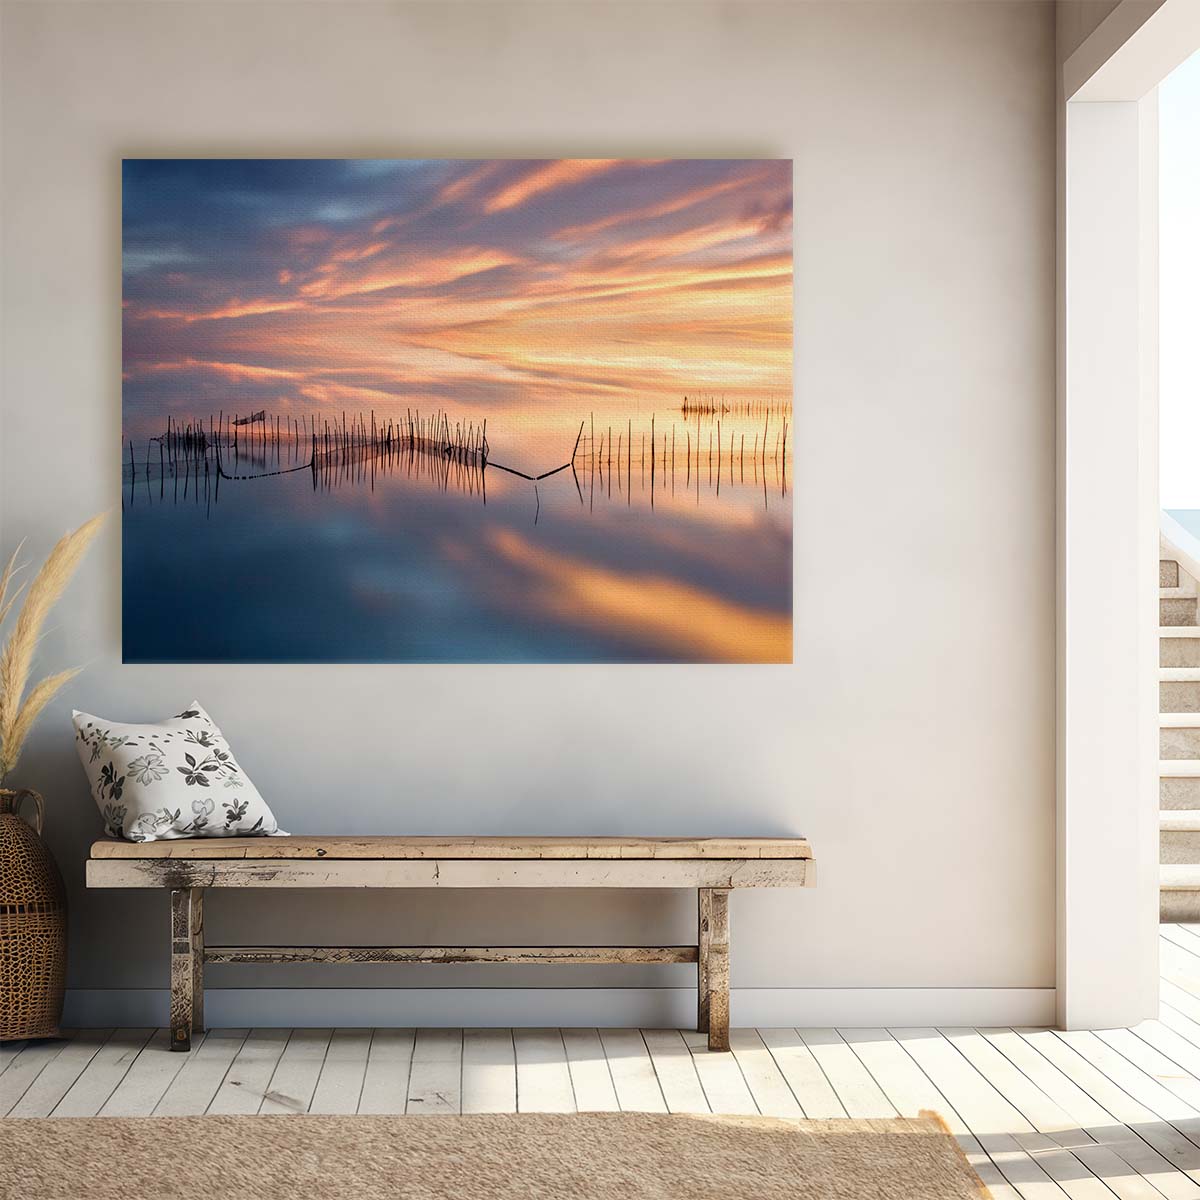 Serene Valencia Sunset Seascape Minimalist Wall Art by Luxuriance Designs. Made in USA.